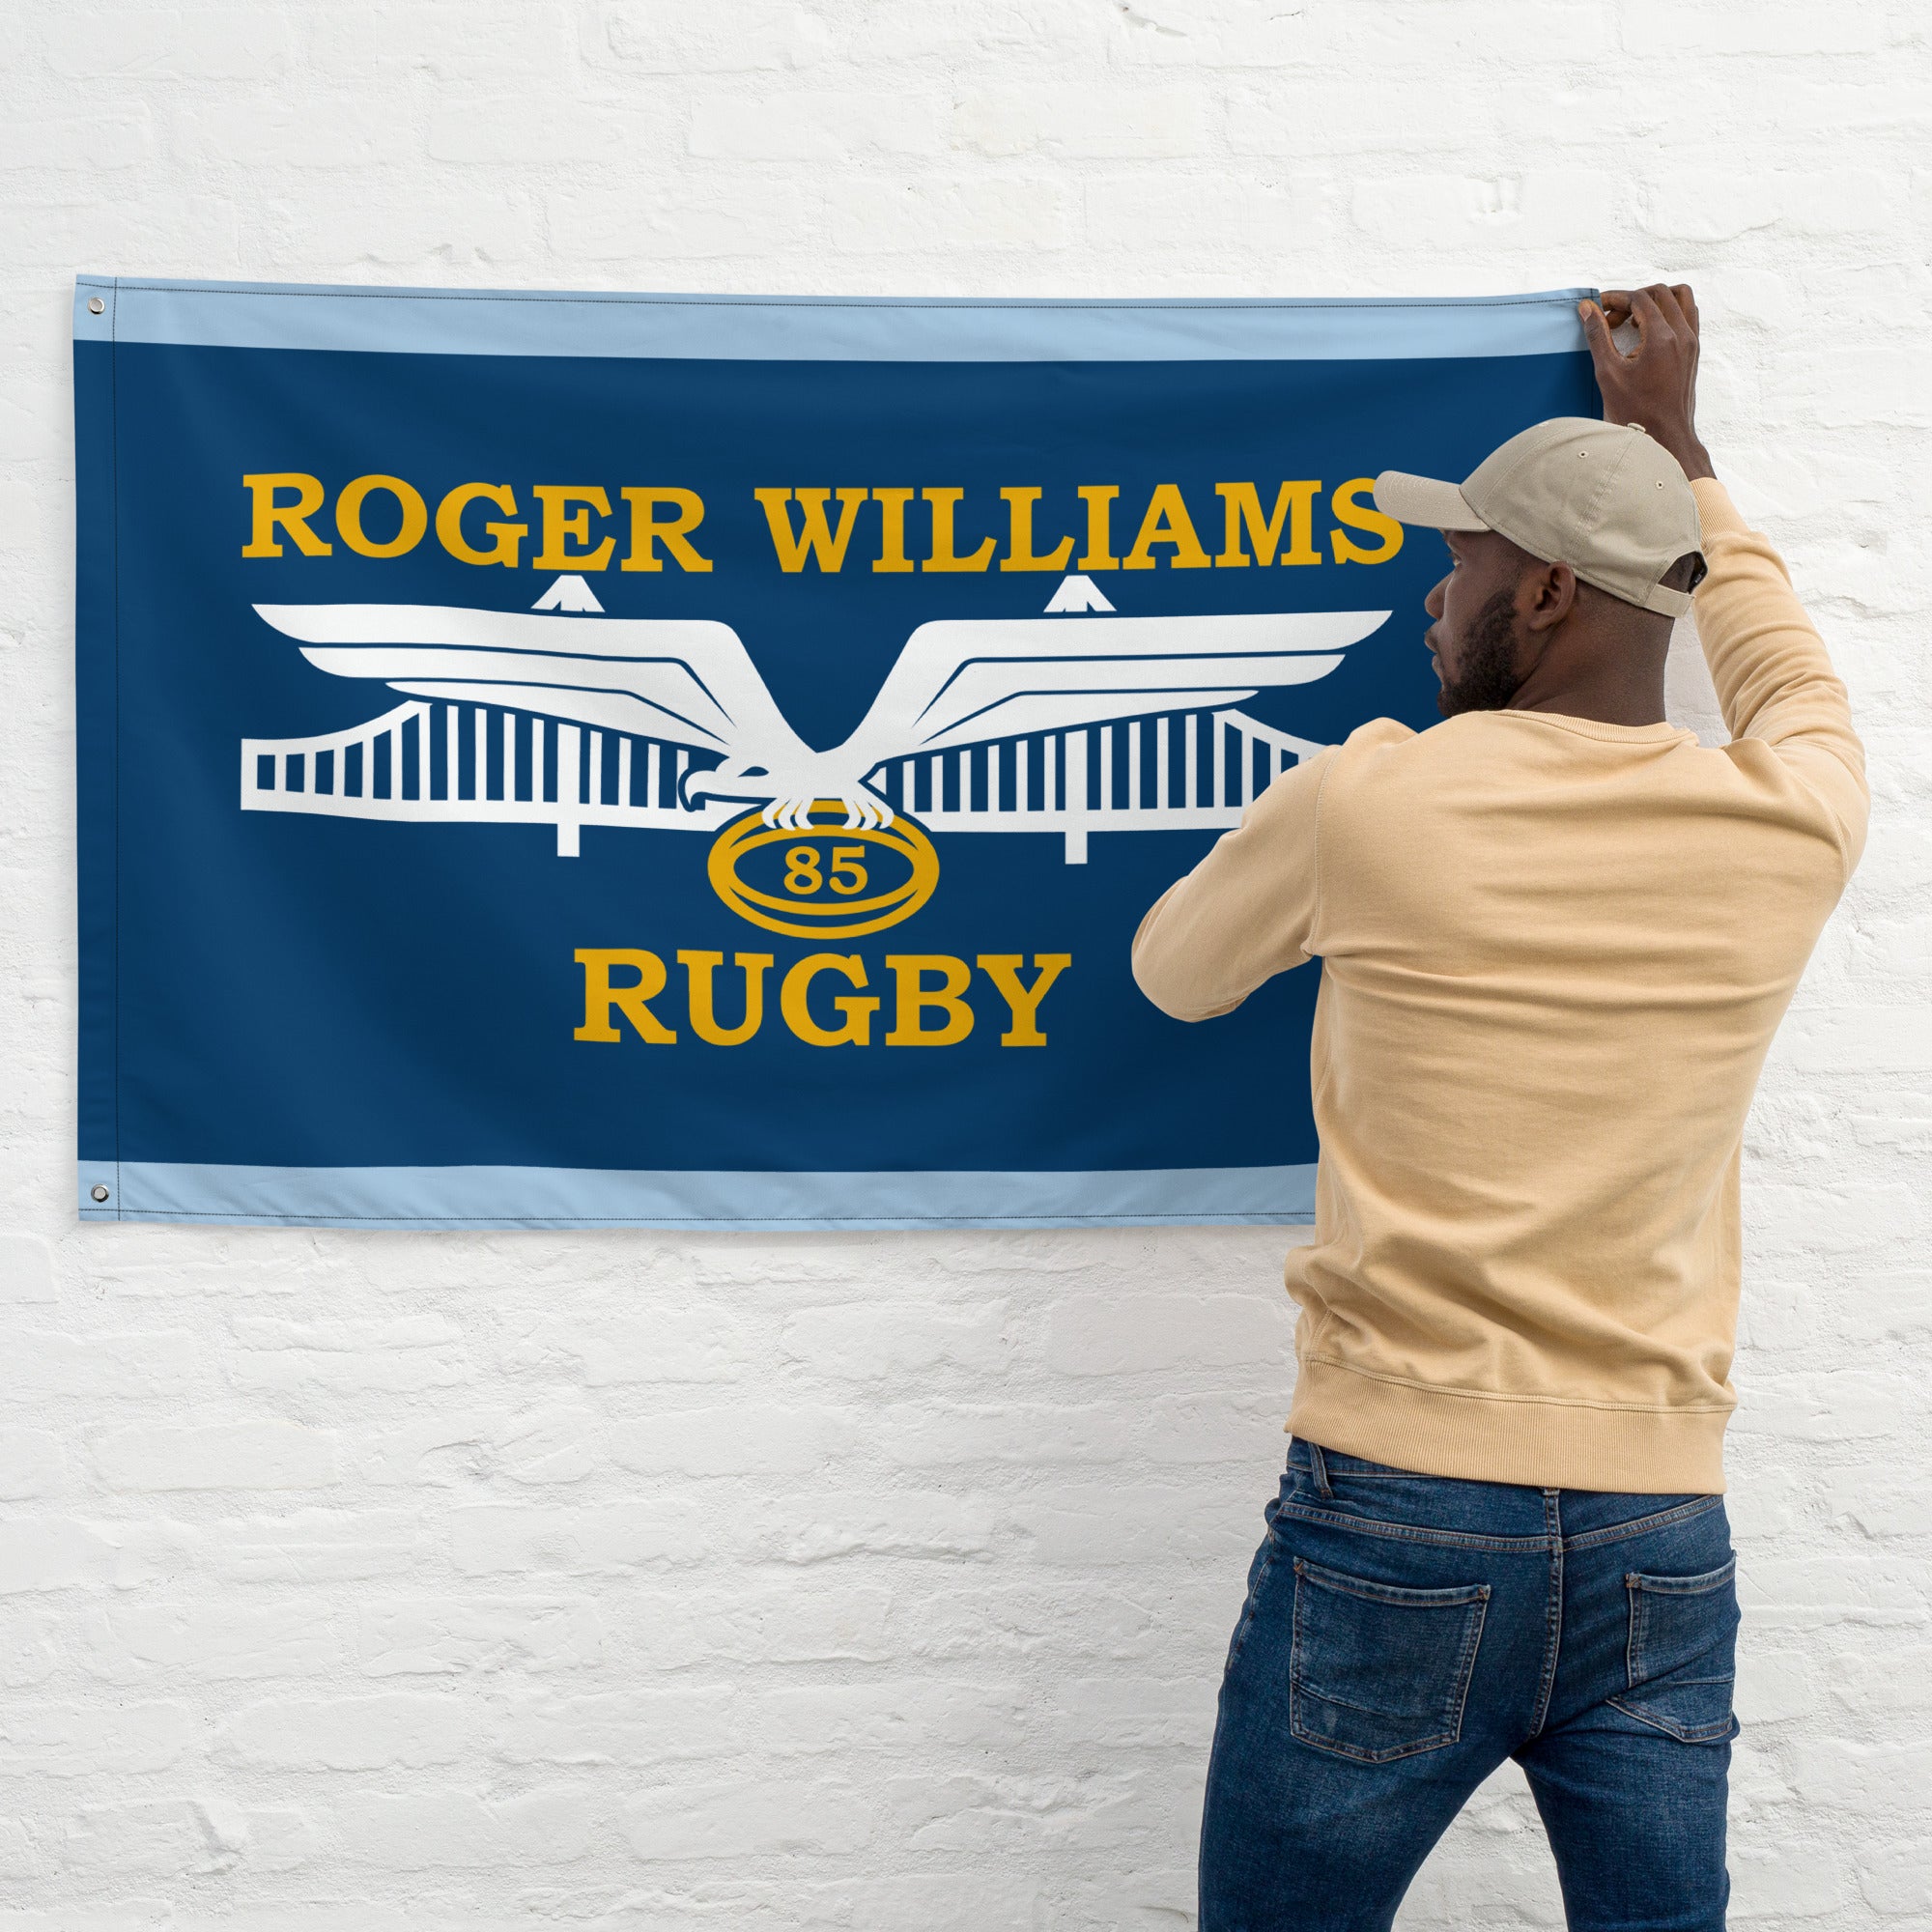 Rugby Imports Roger Williams RFC Wall Flag